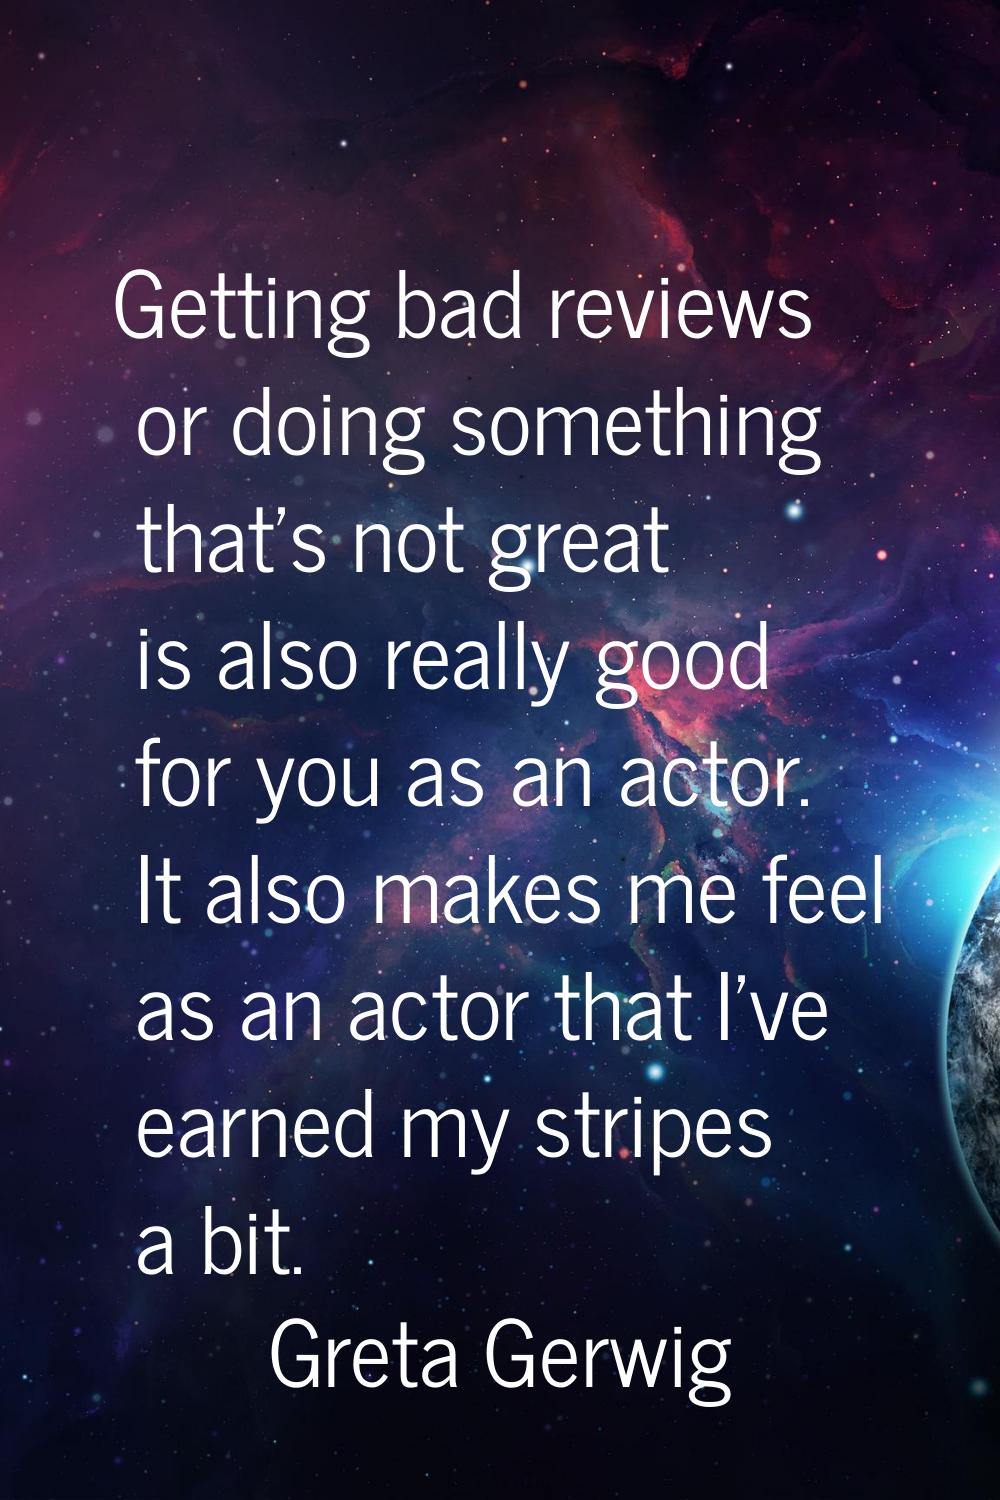 Getting bad reviews or doing something that's not great is also really good for you as an actor. It